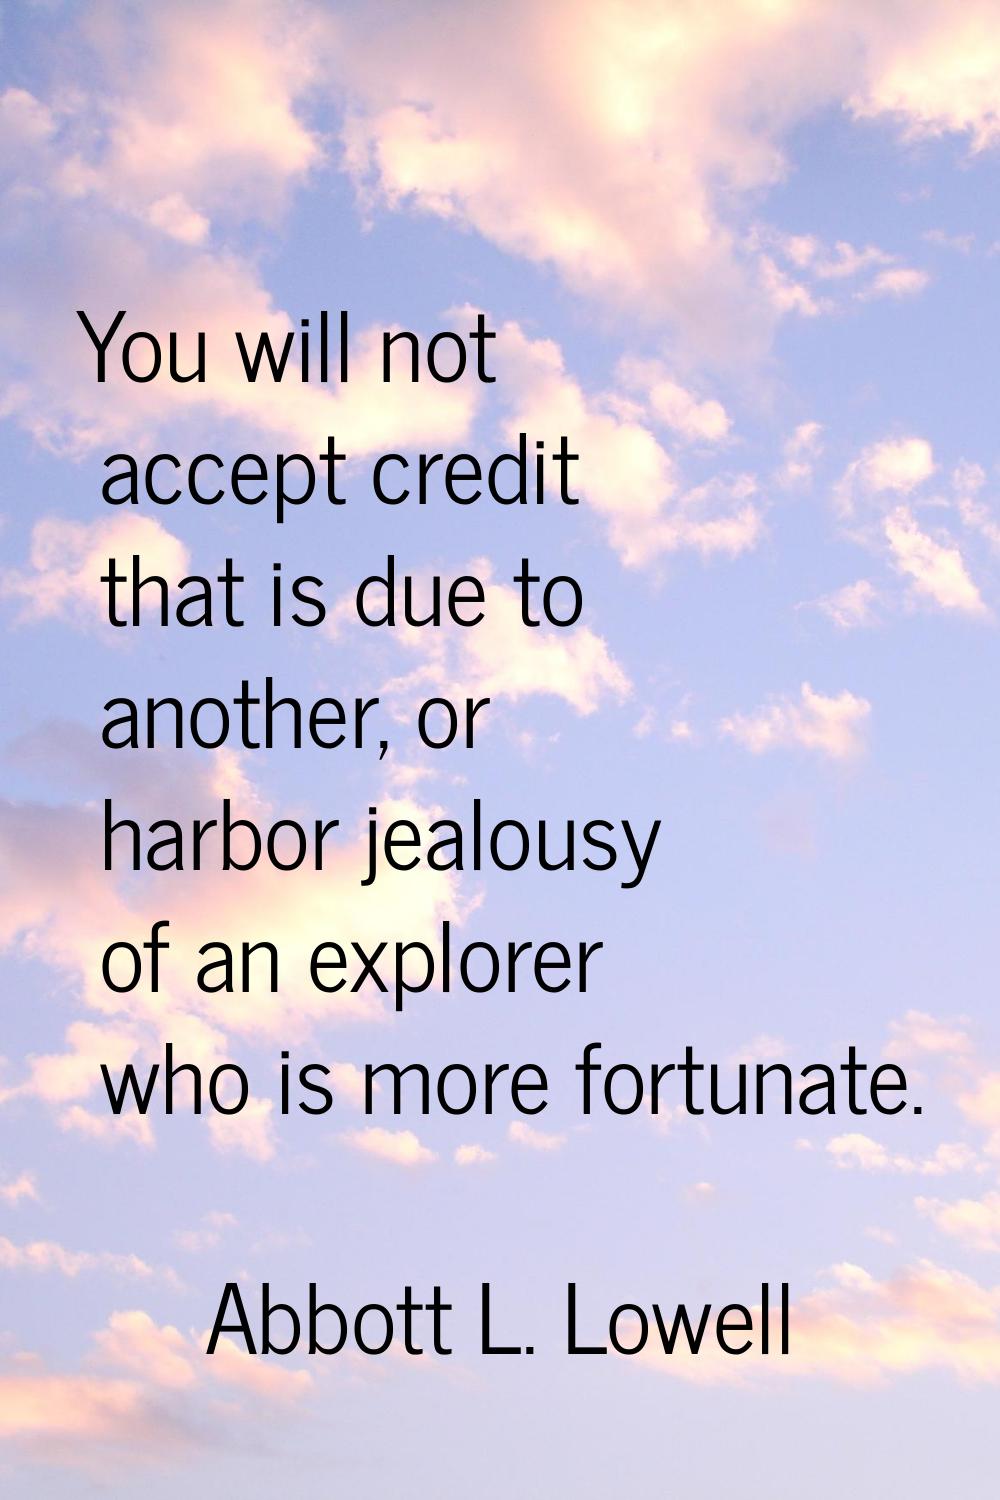 You will not accept credit that is due to another, or harbor jealousy of an explorer who is more fo